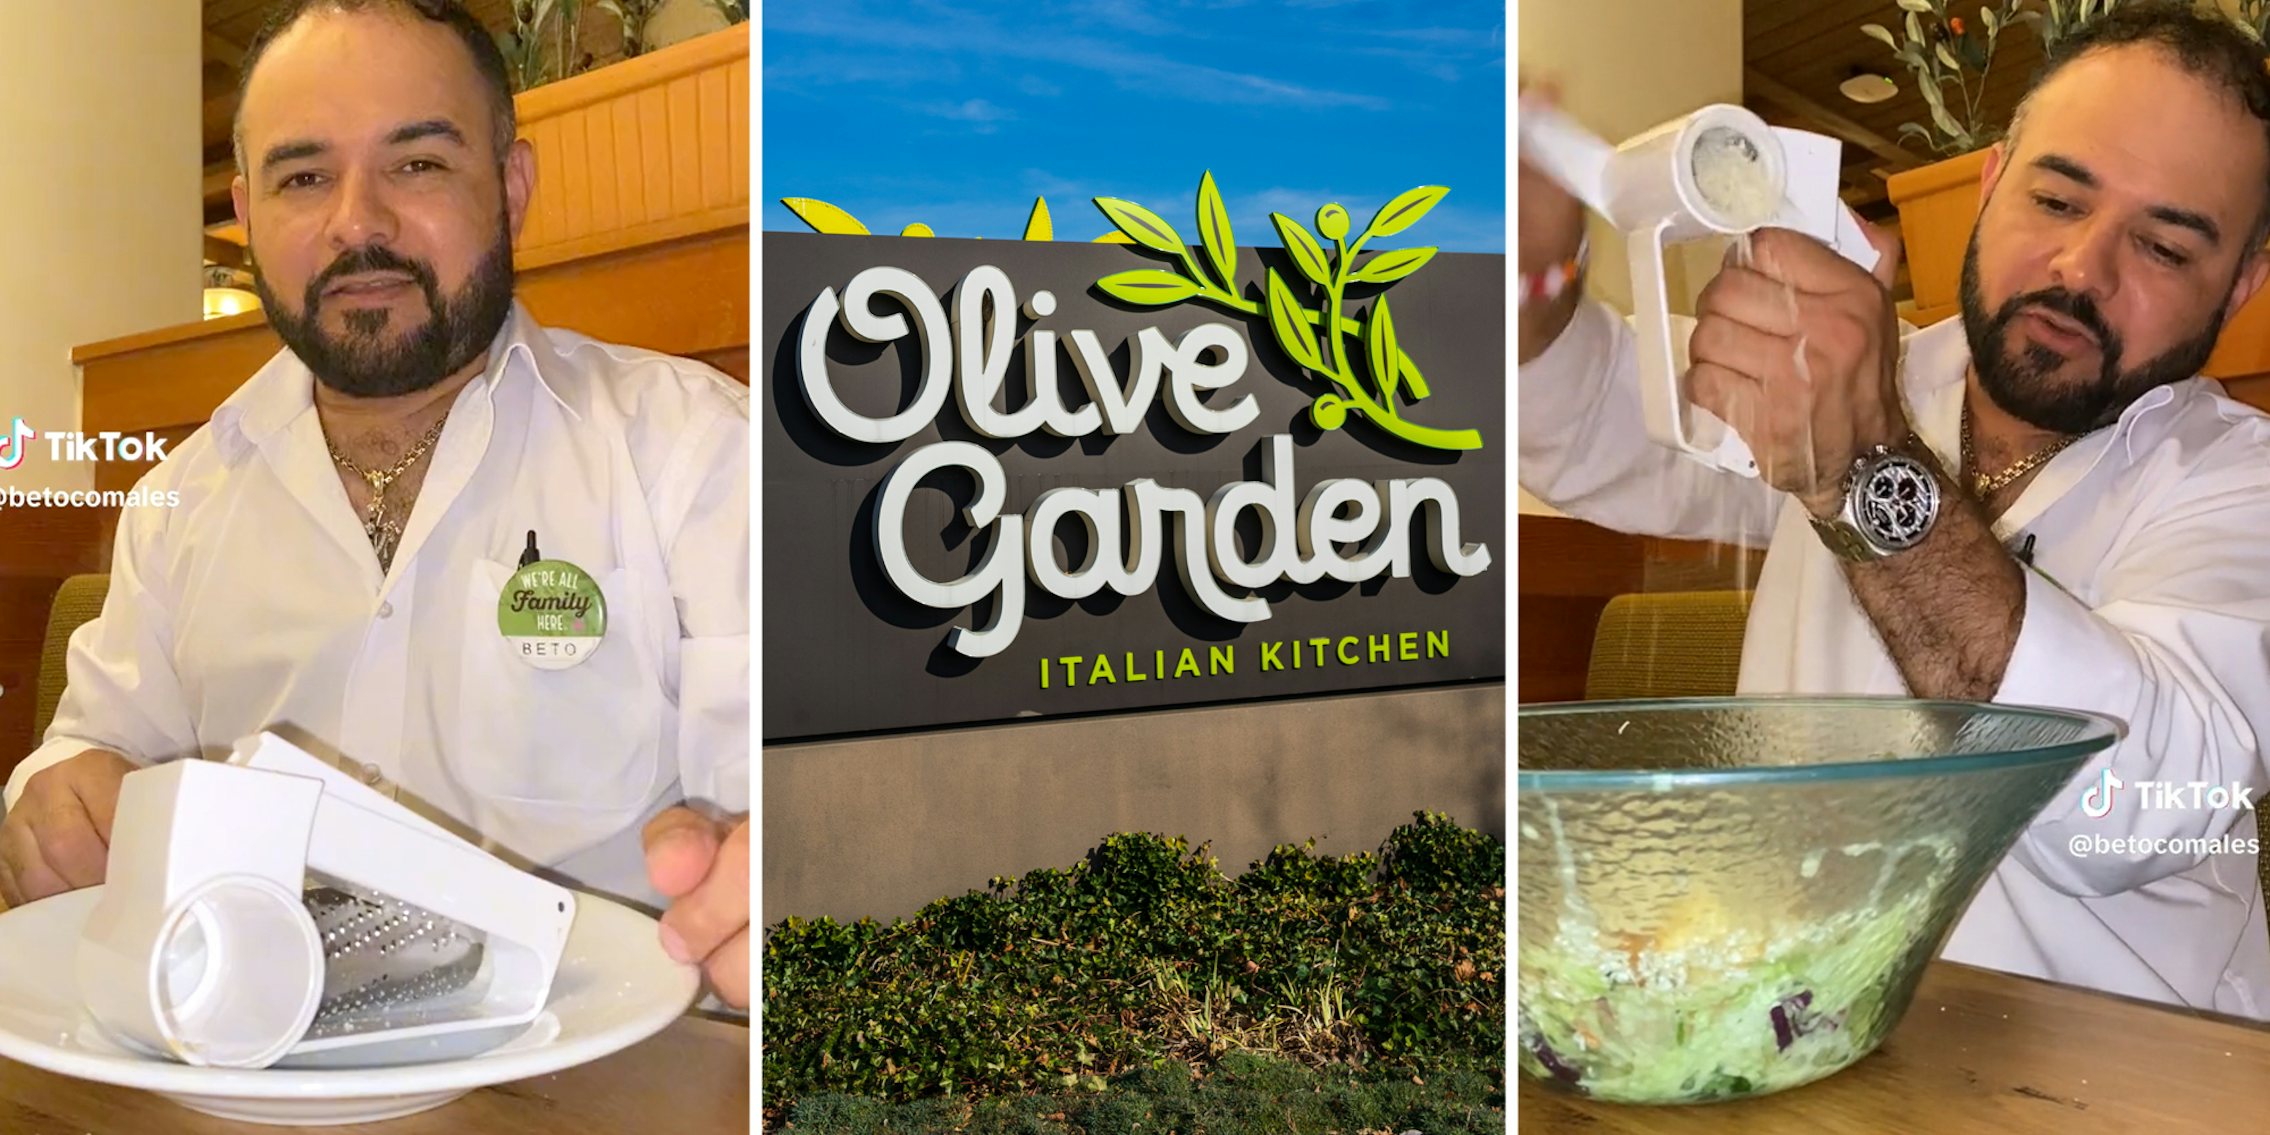 Can You Buy The Olive Garden Cheese Grater?